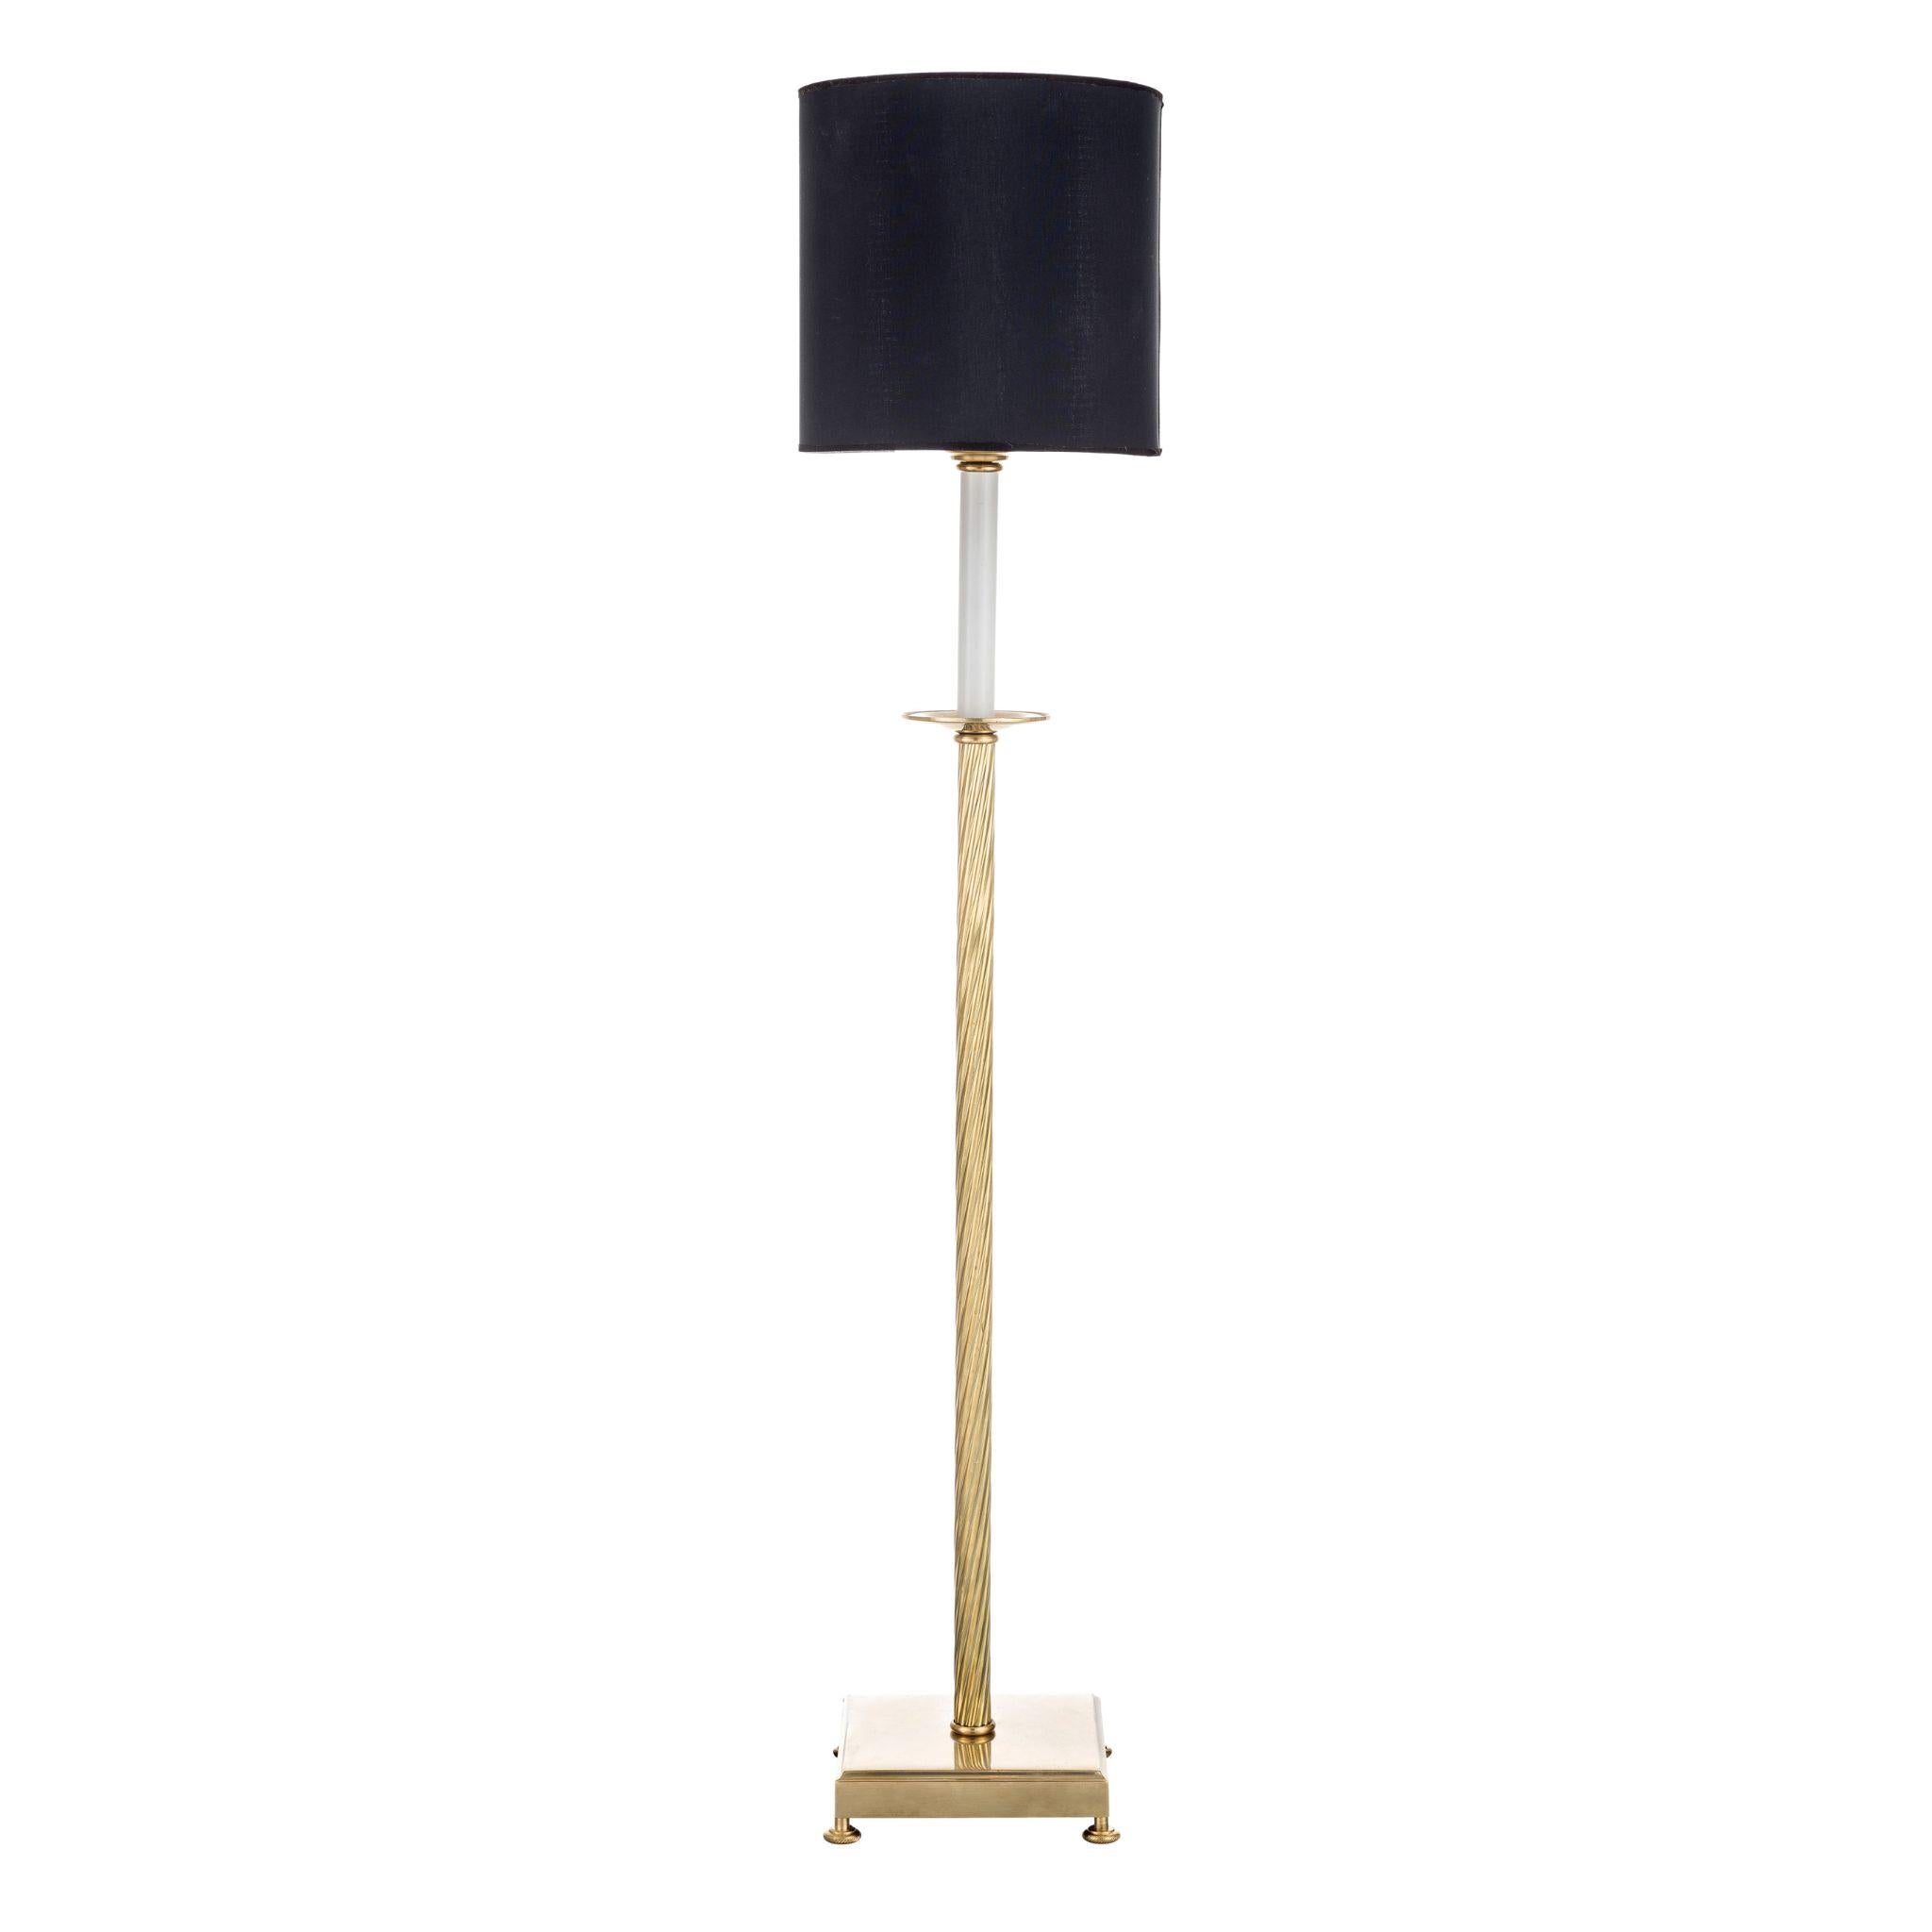 Enhance your living space with Novecento exquisite lamp featuring a stunning natural brass shaped structure, complemented by a sleek black fabric lampshade. This contemporary design effortlessly combines elegance and functionality, providing a warm